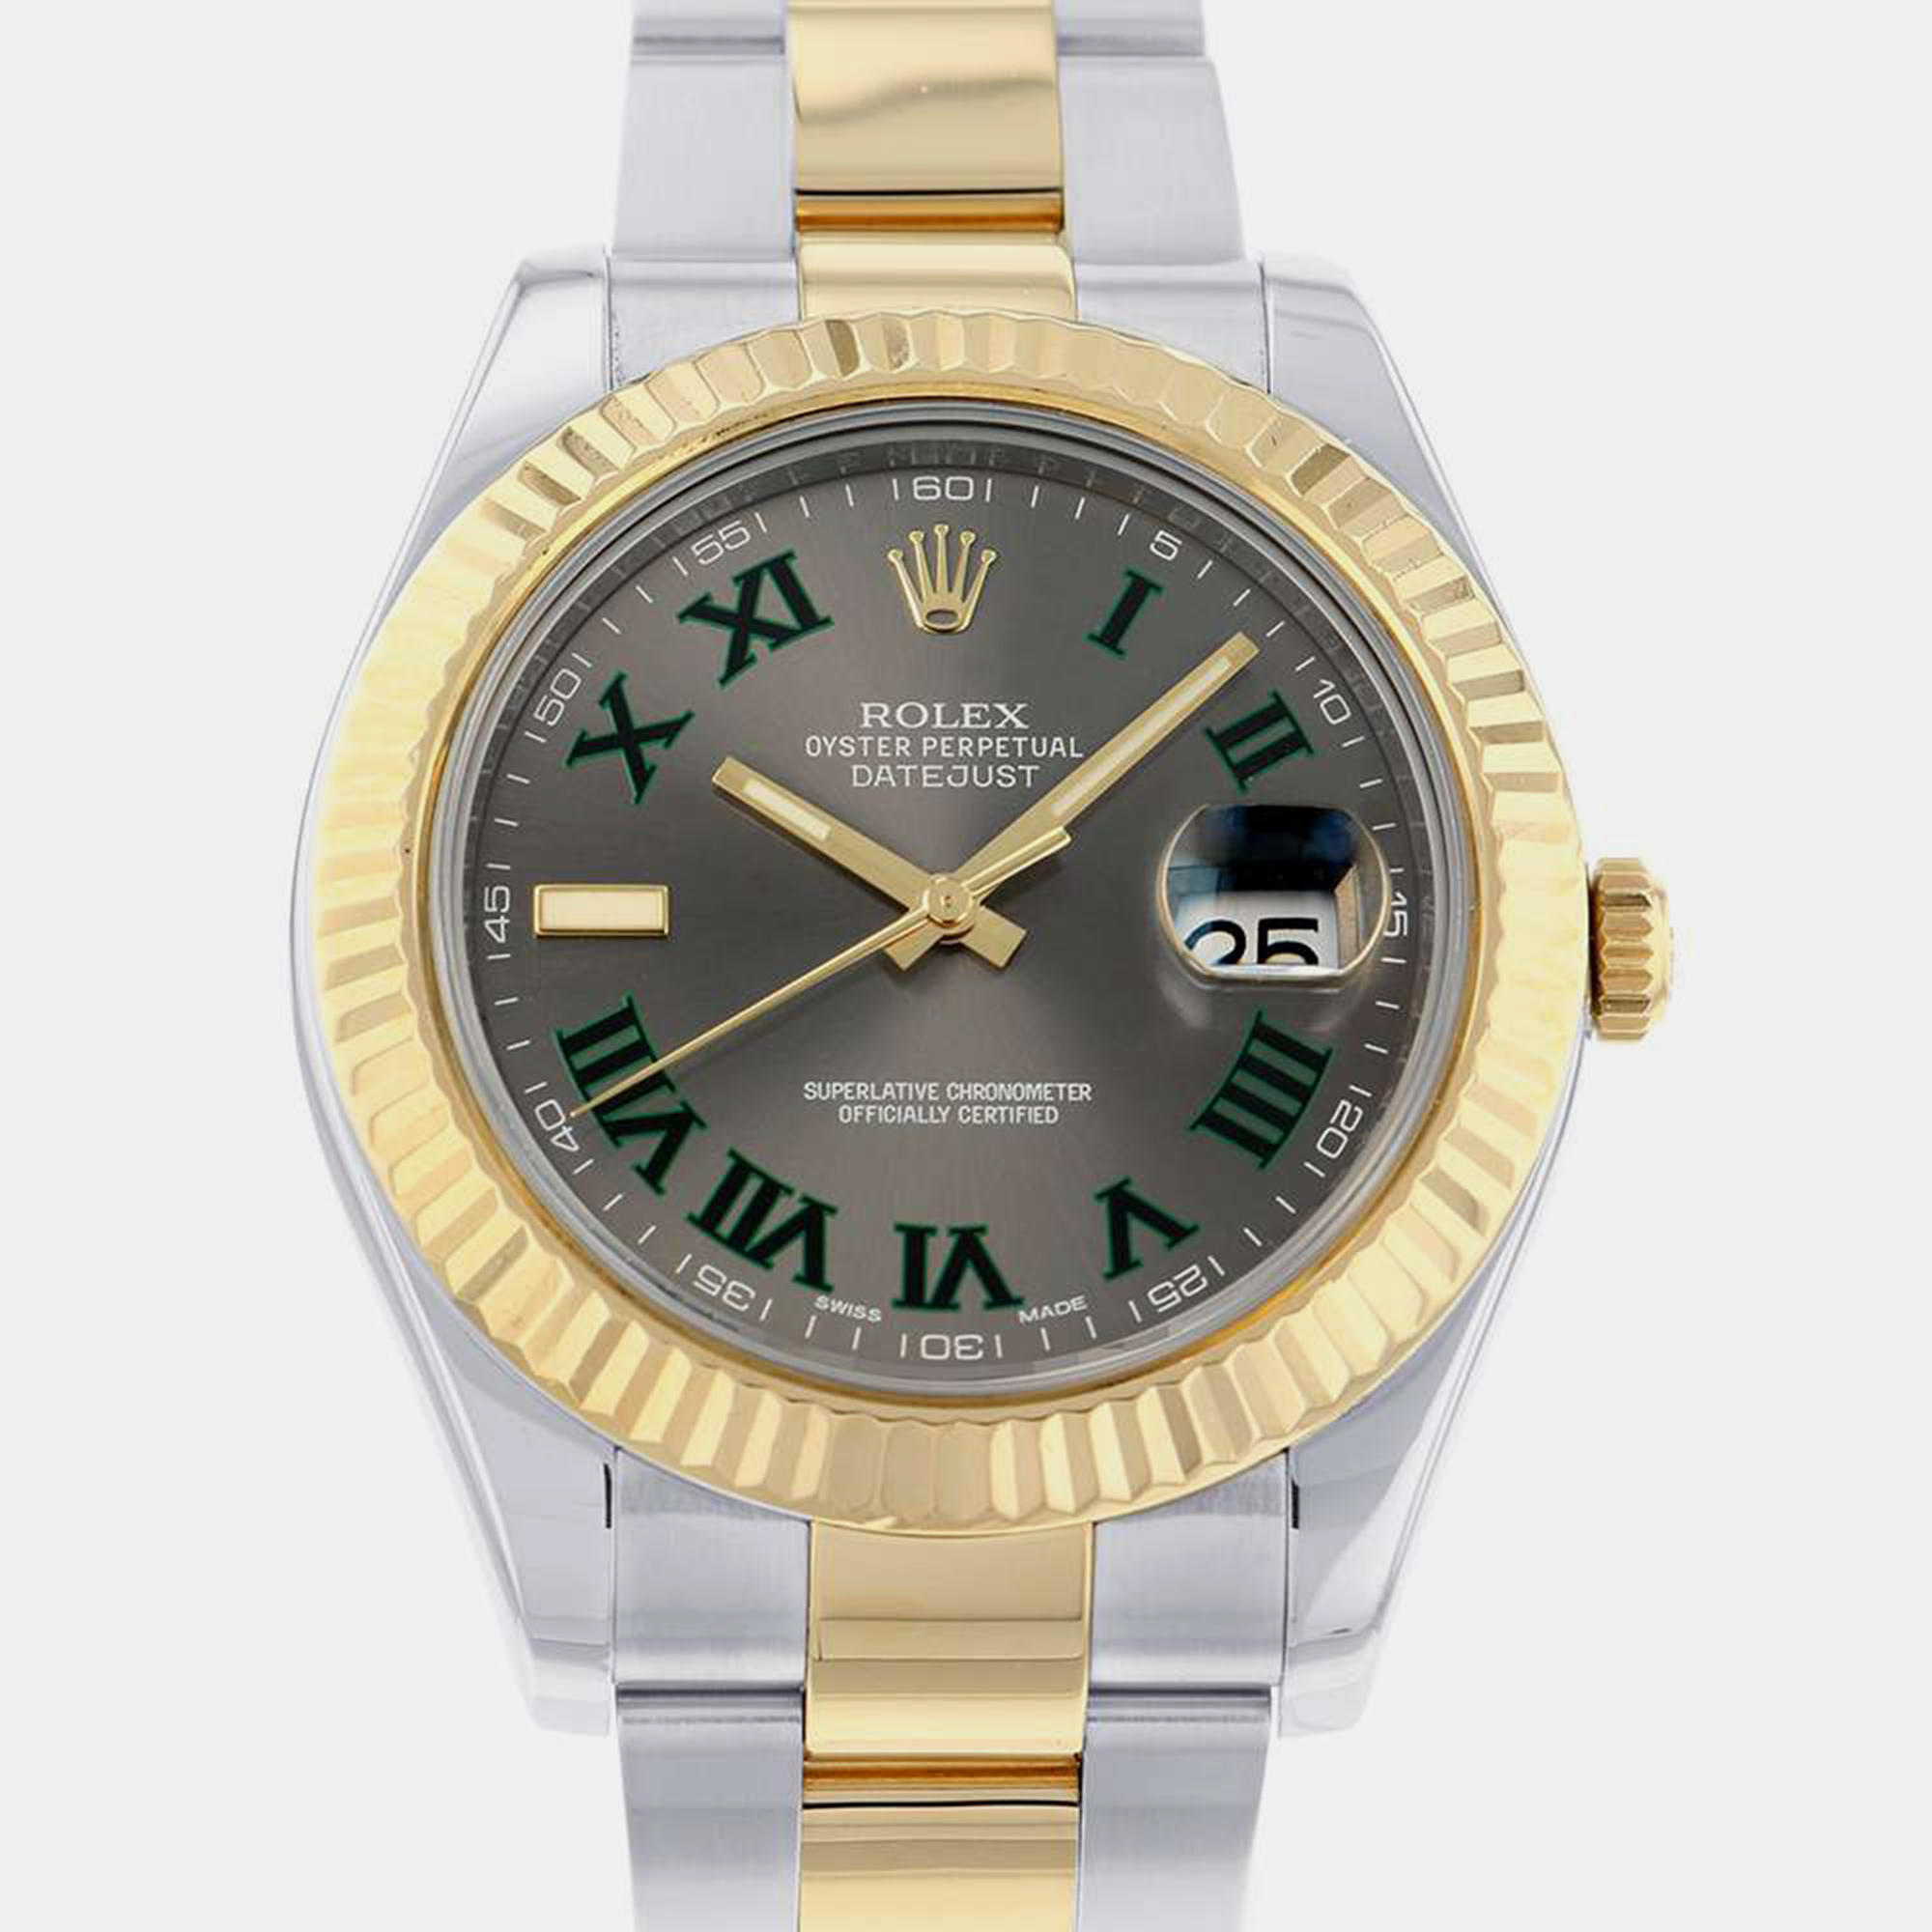 Rolex grey 18k yellow gold stainless steel datejust 116333 automatic men's wristwatch 41 mm